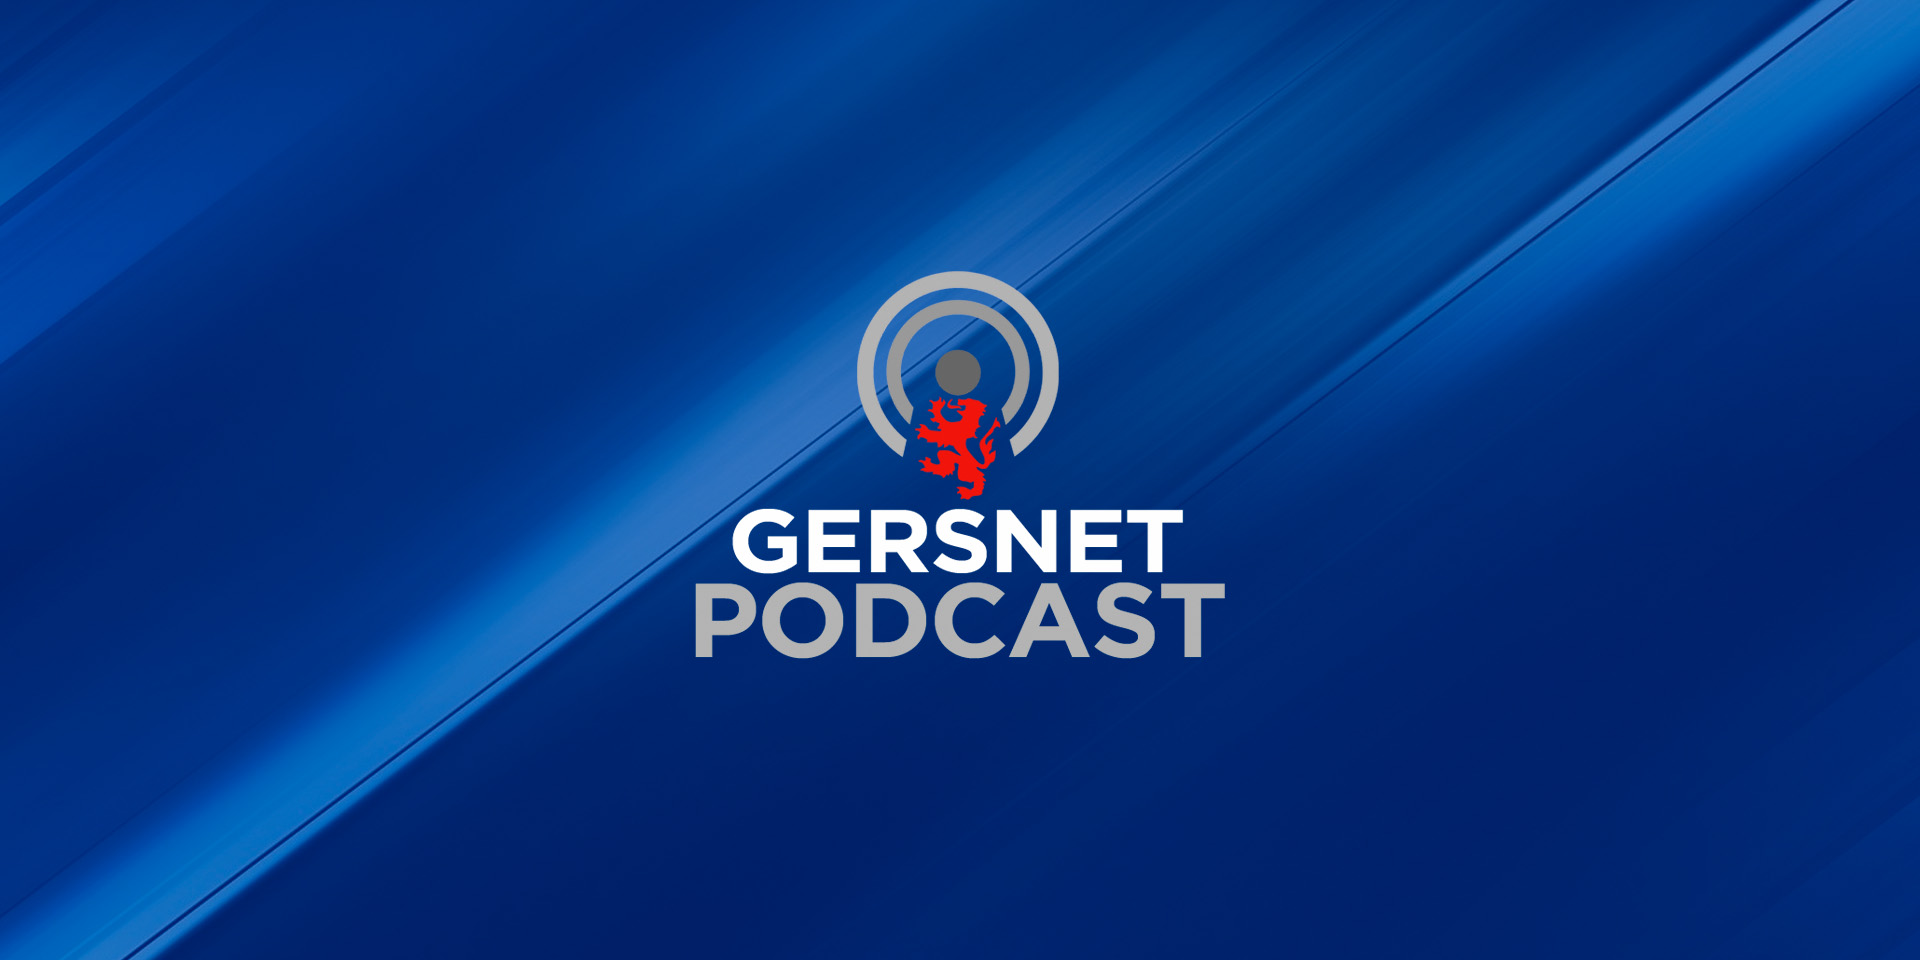 Gersnet Podcast 311 - Three points in Paisley